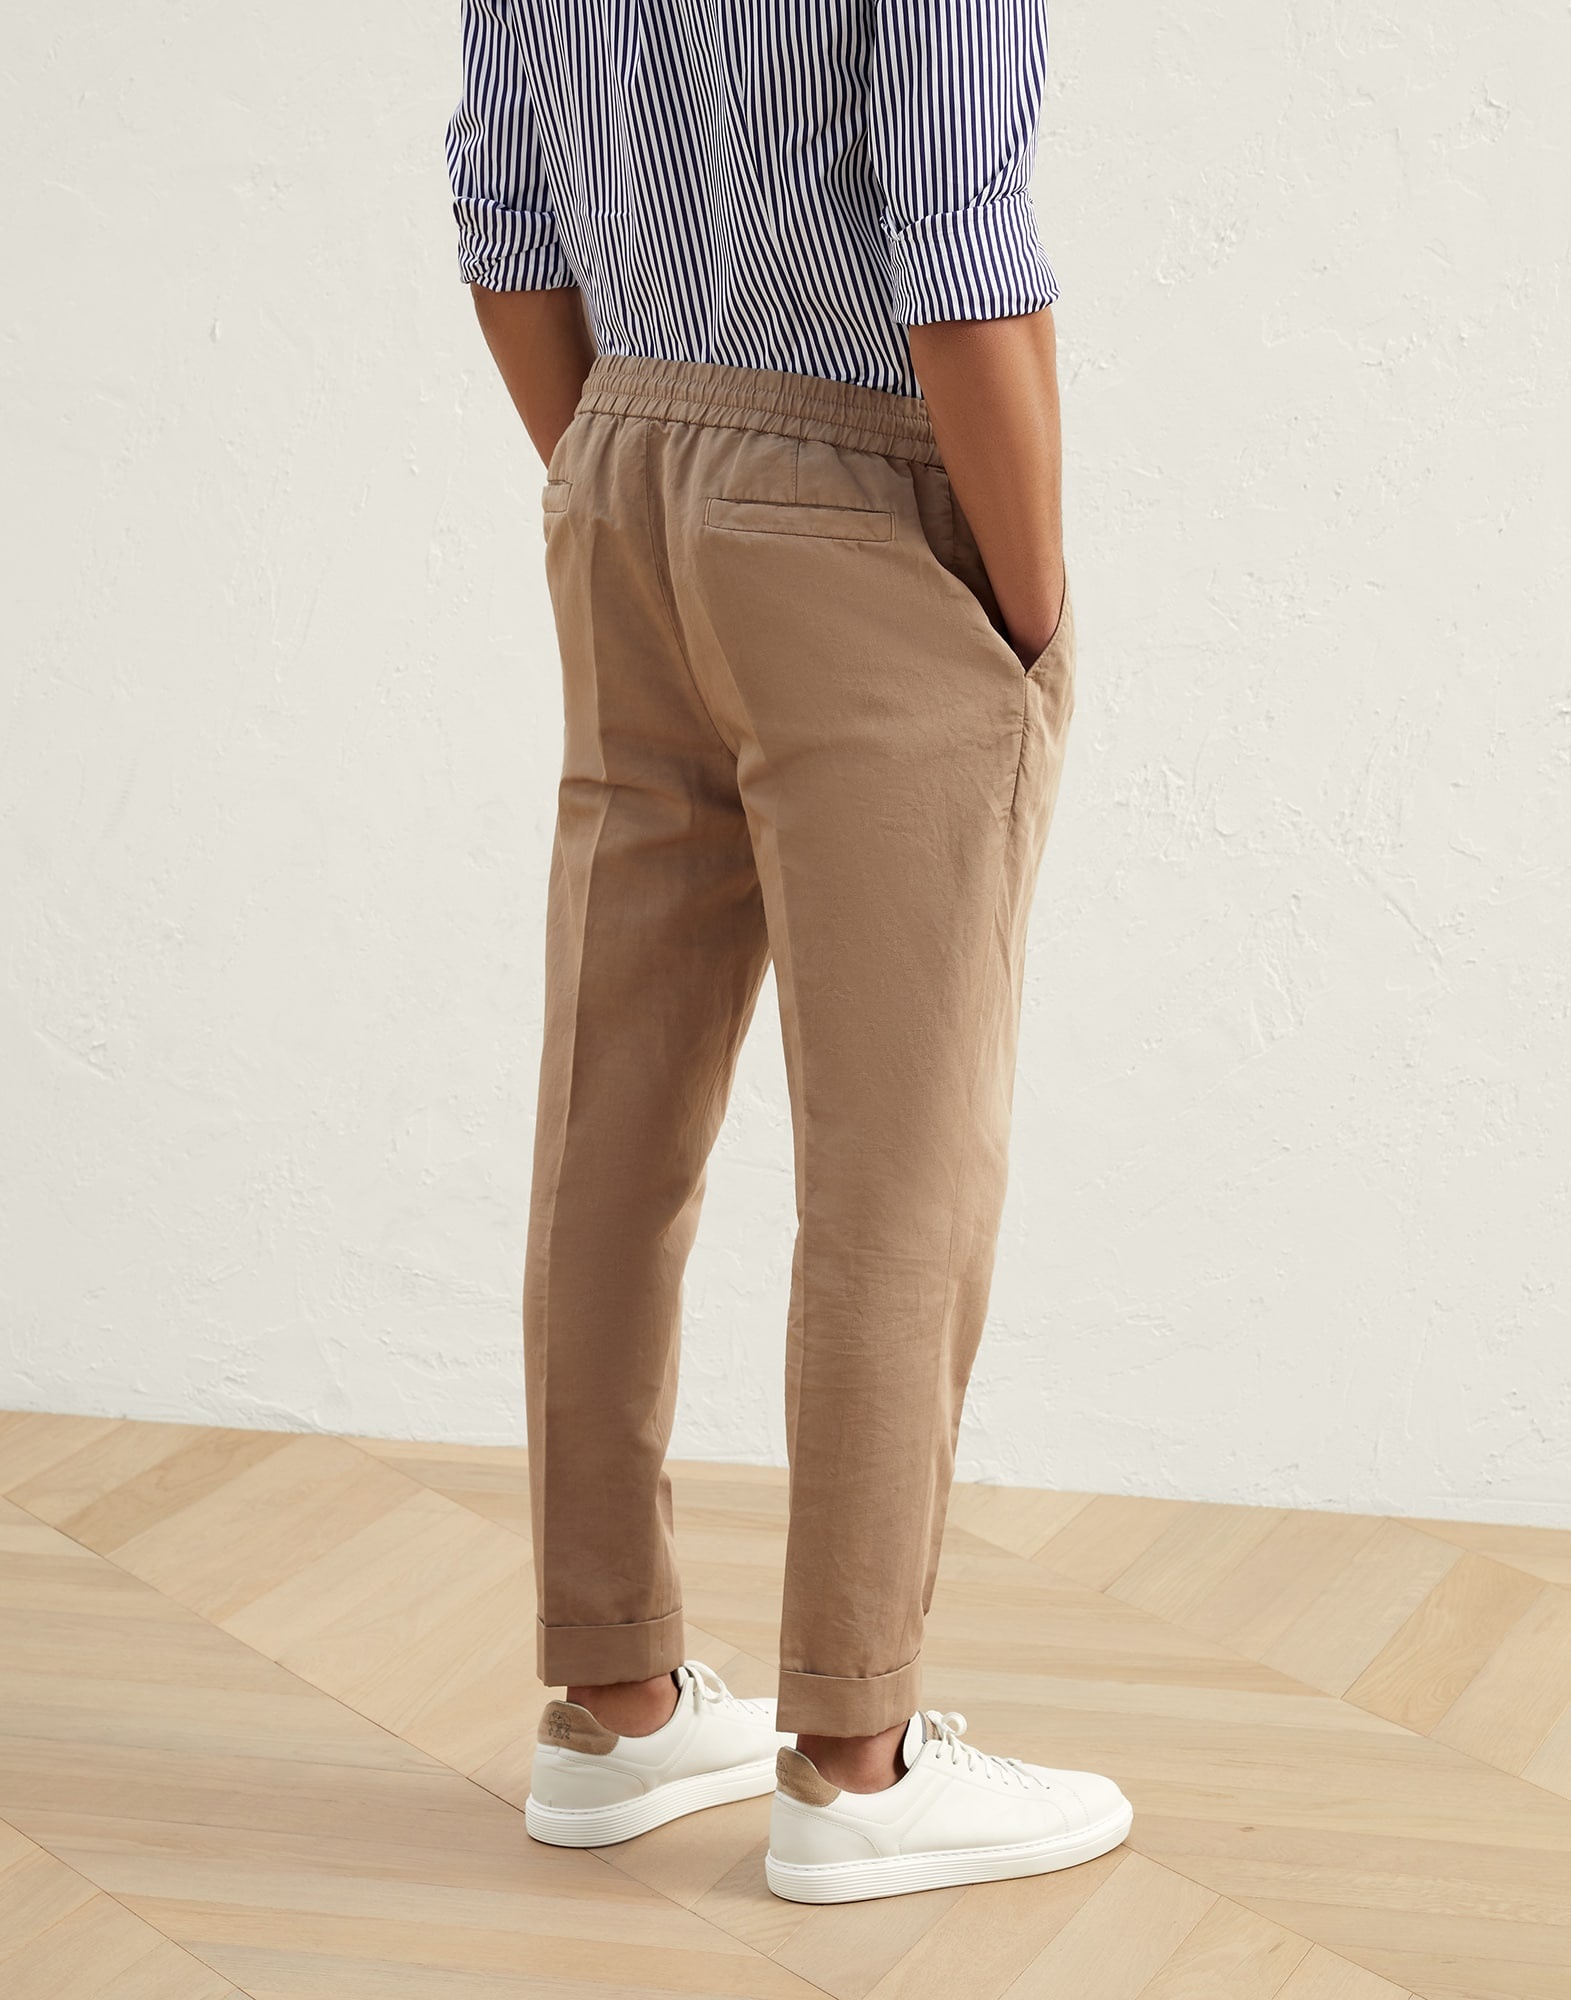 Garment-dyed leisure fit trousers in twisted linen and cotton gabardine with drawstring and pleat - 2